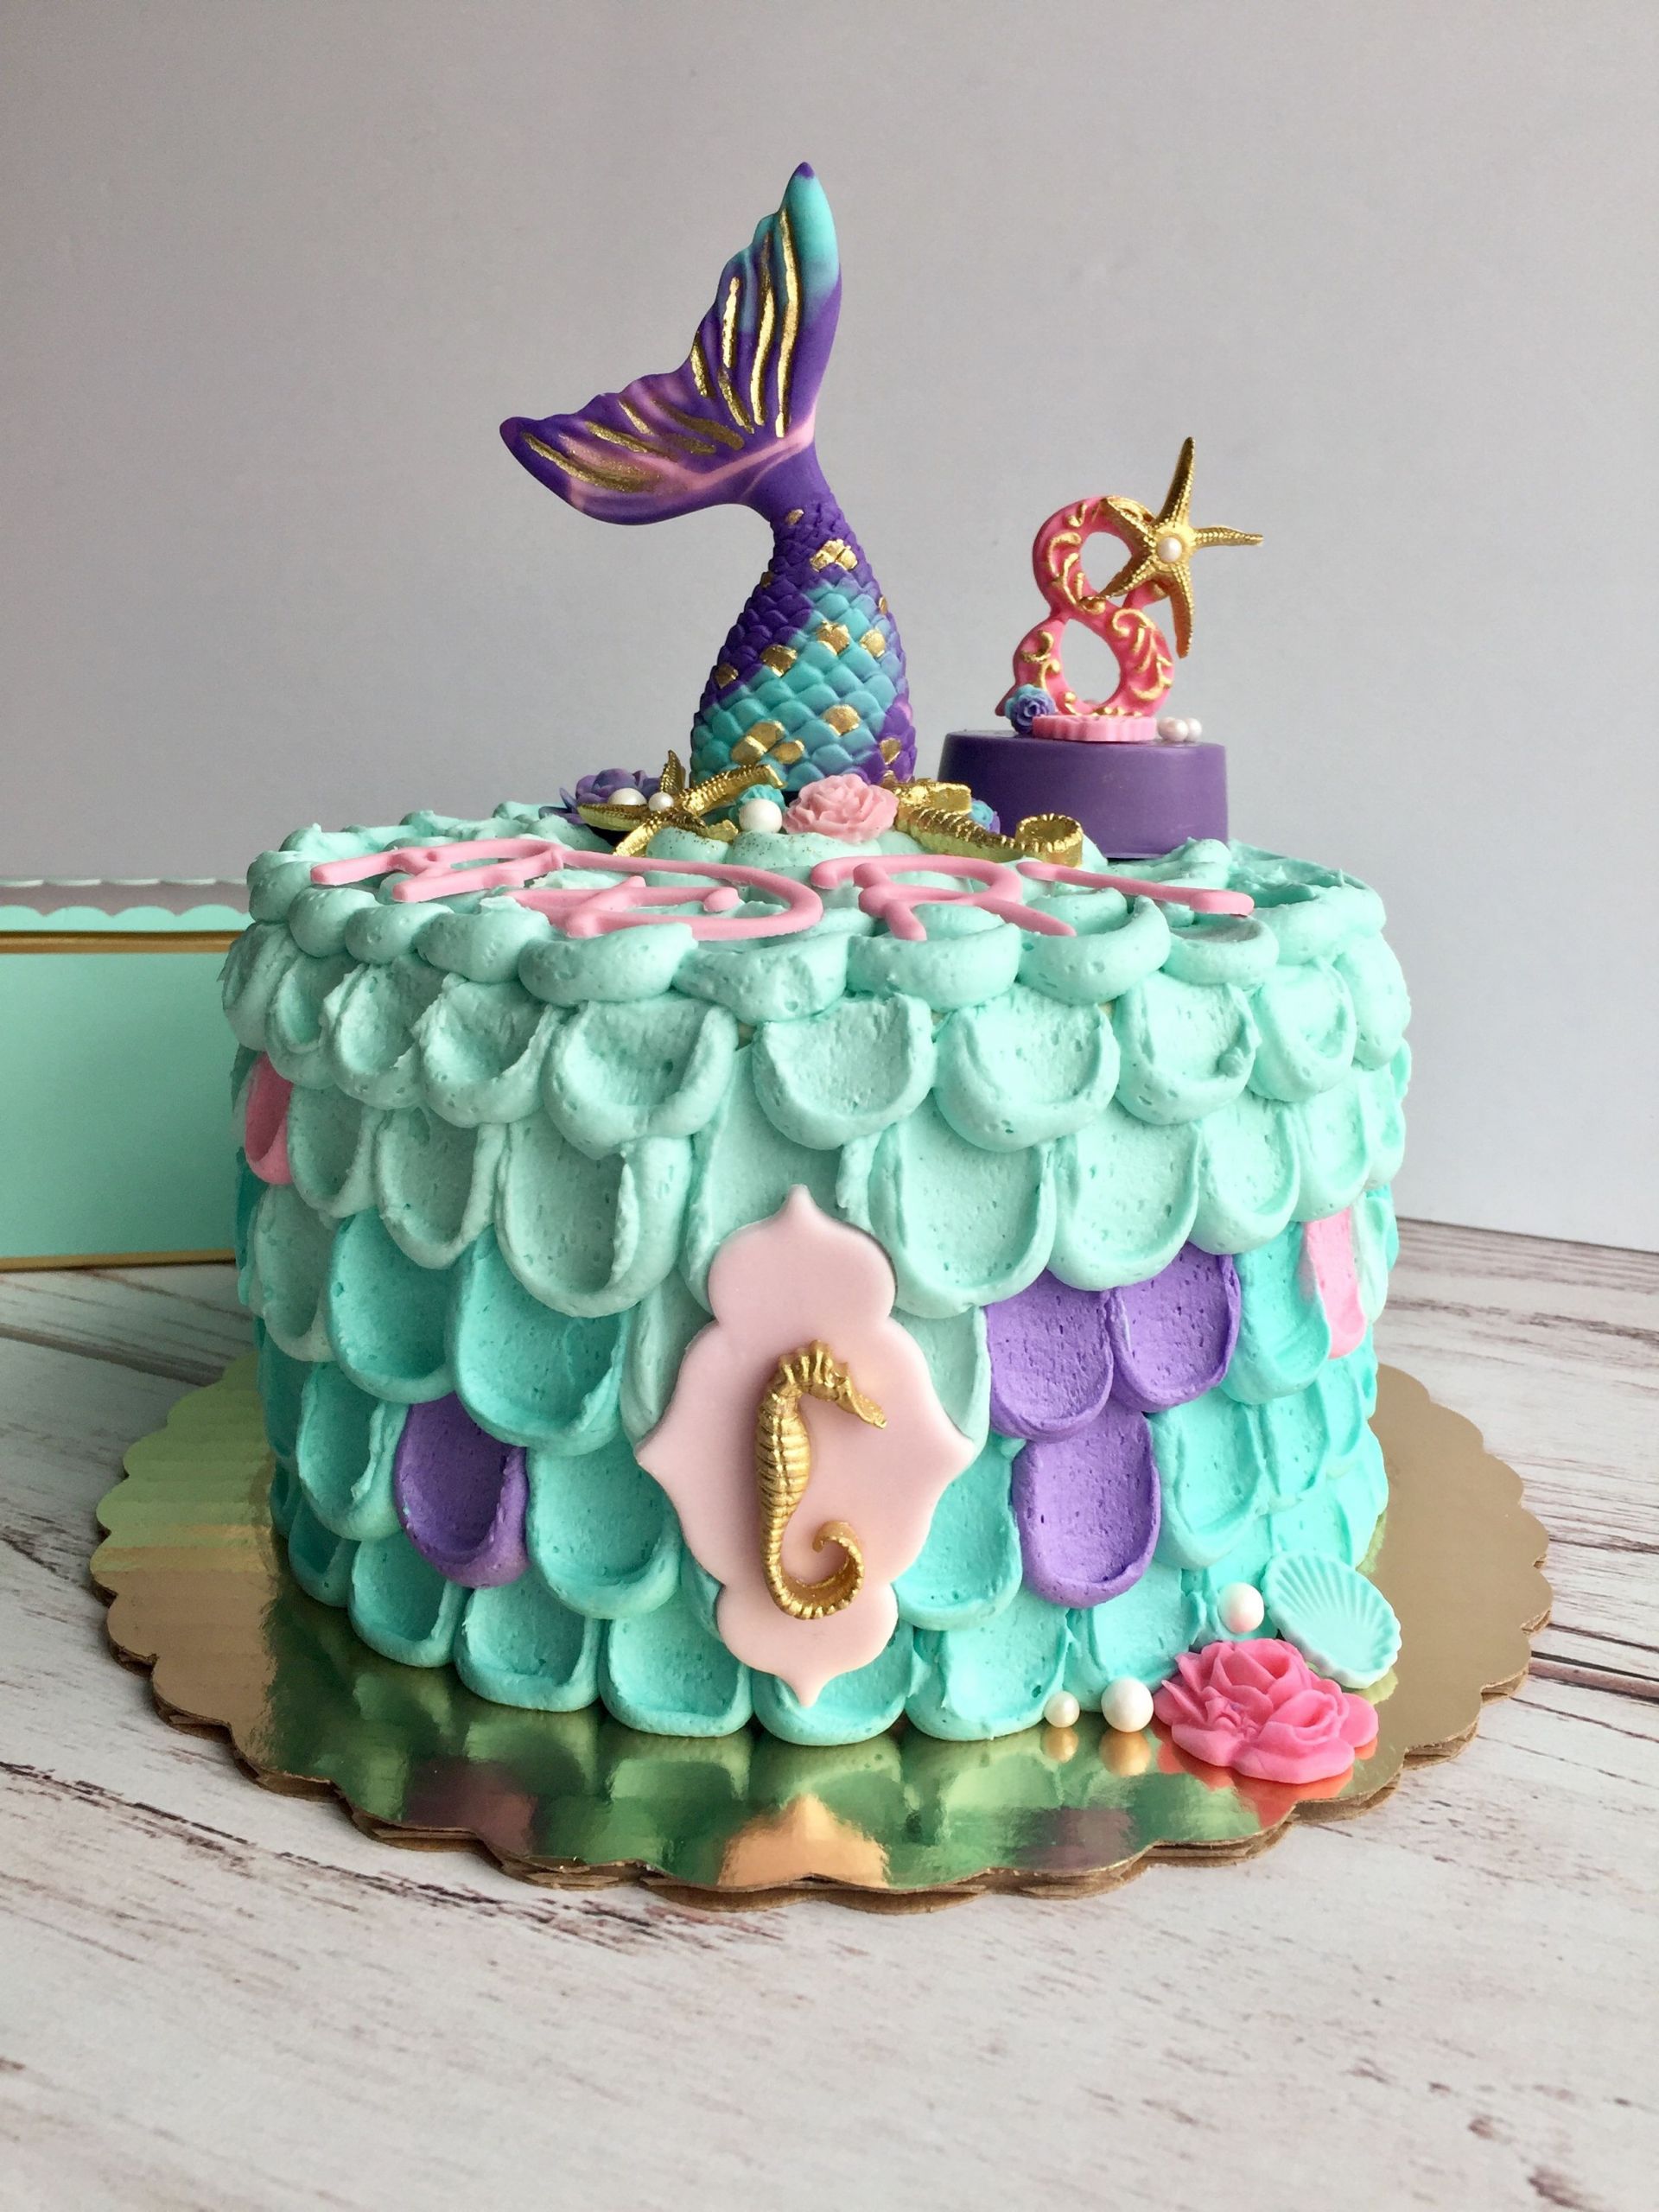 Birthday Gift Ideas For 8 Year Girl
 Mermaid cake for 8 year old